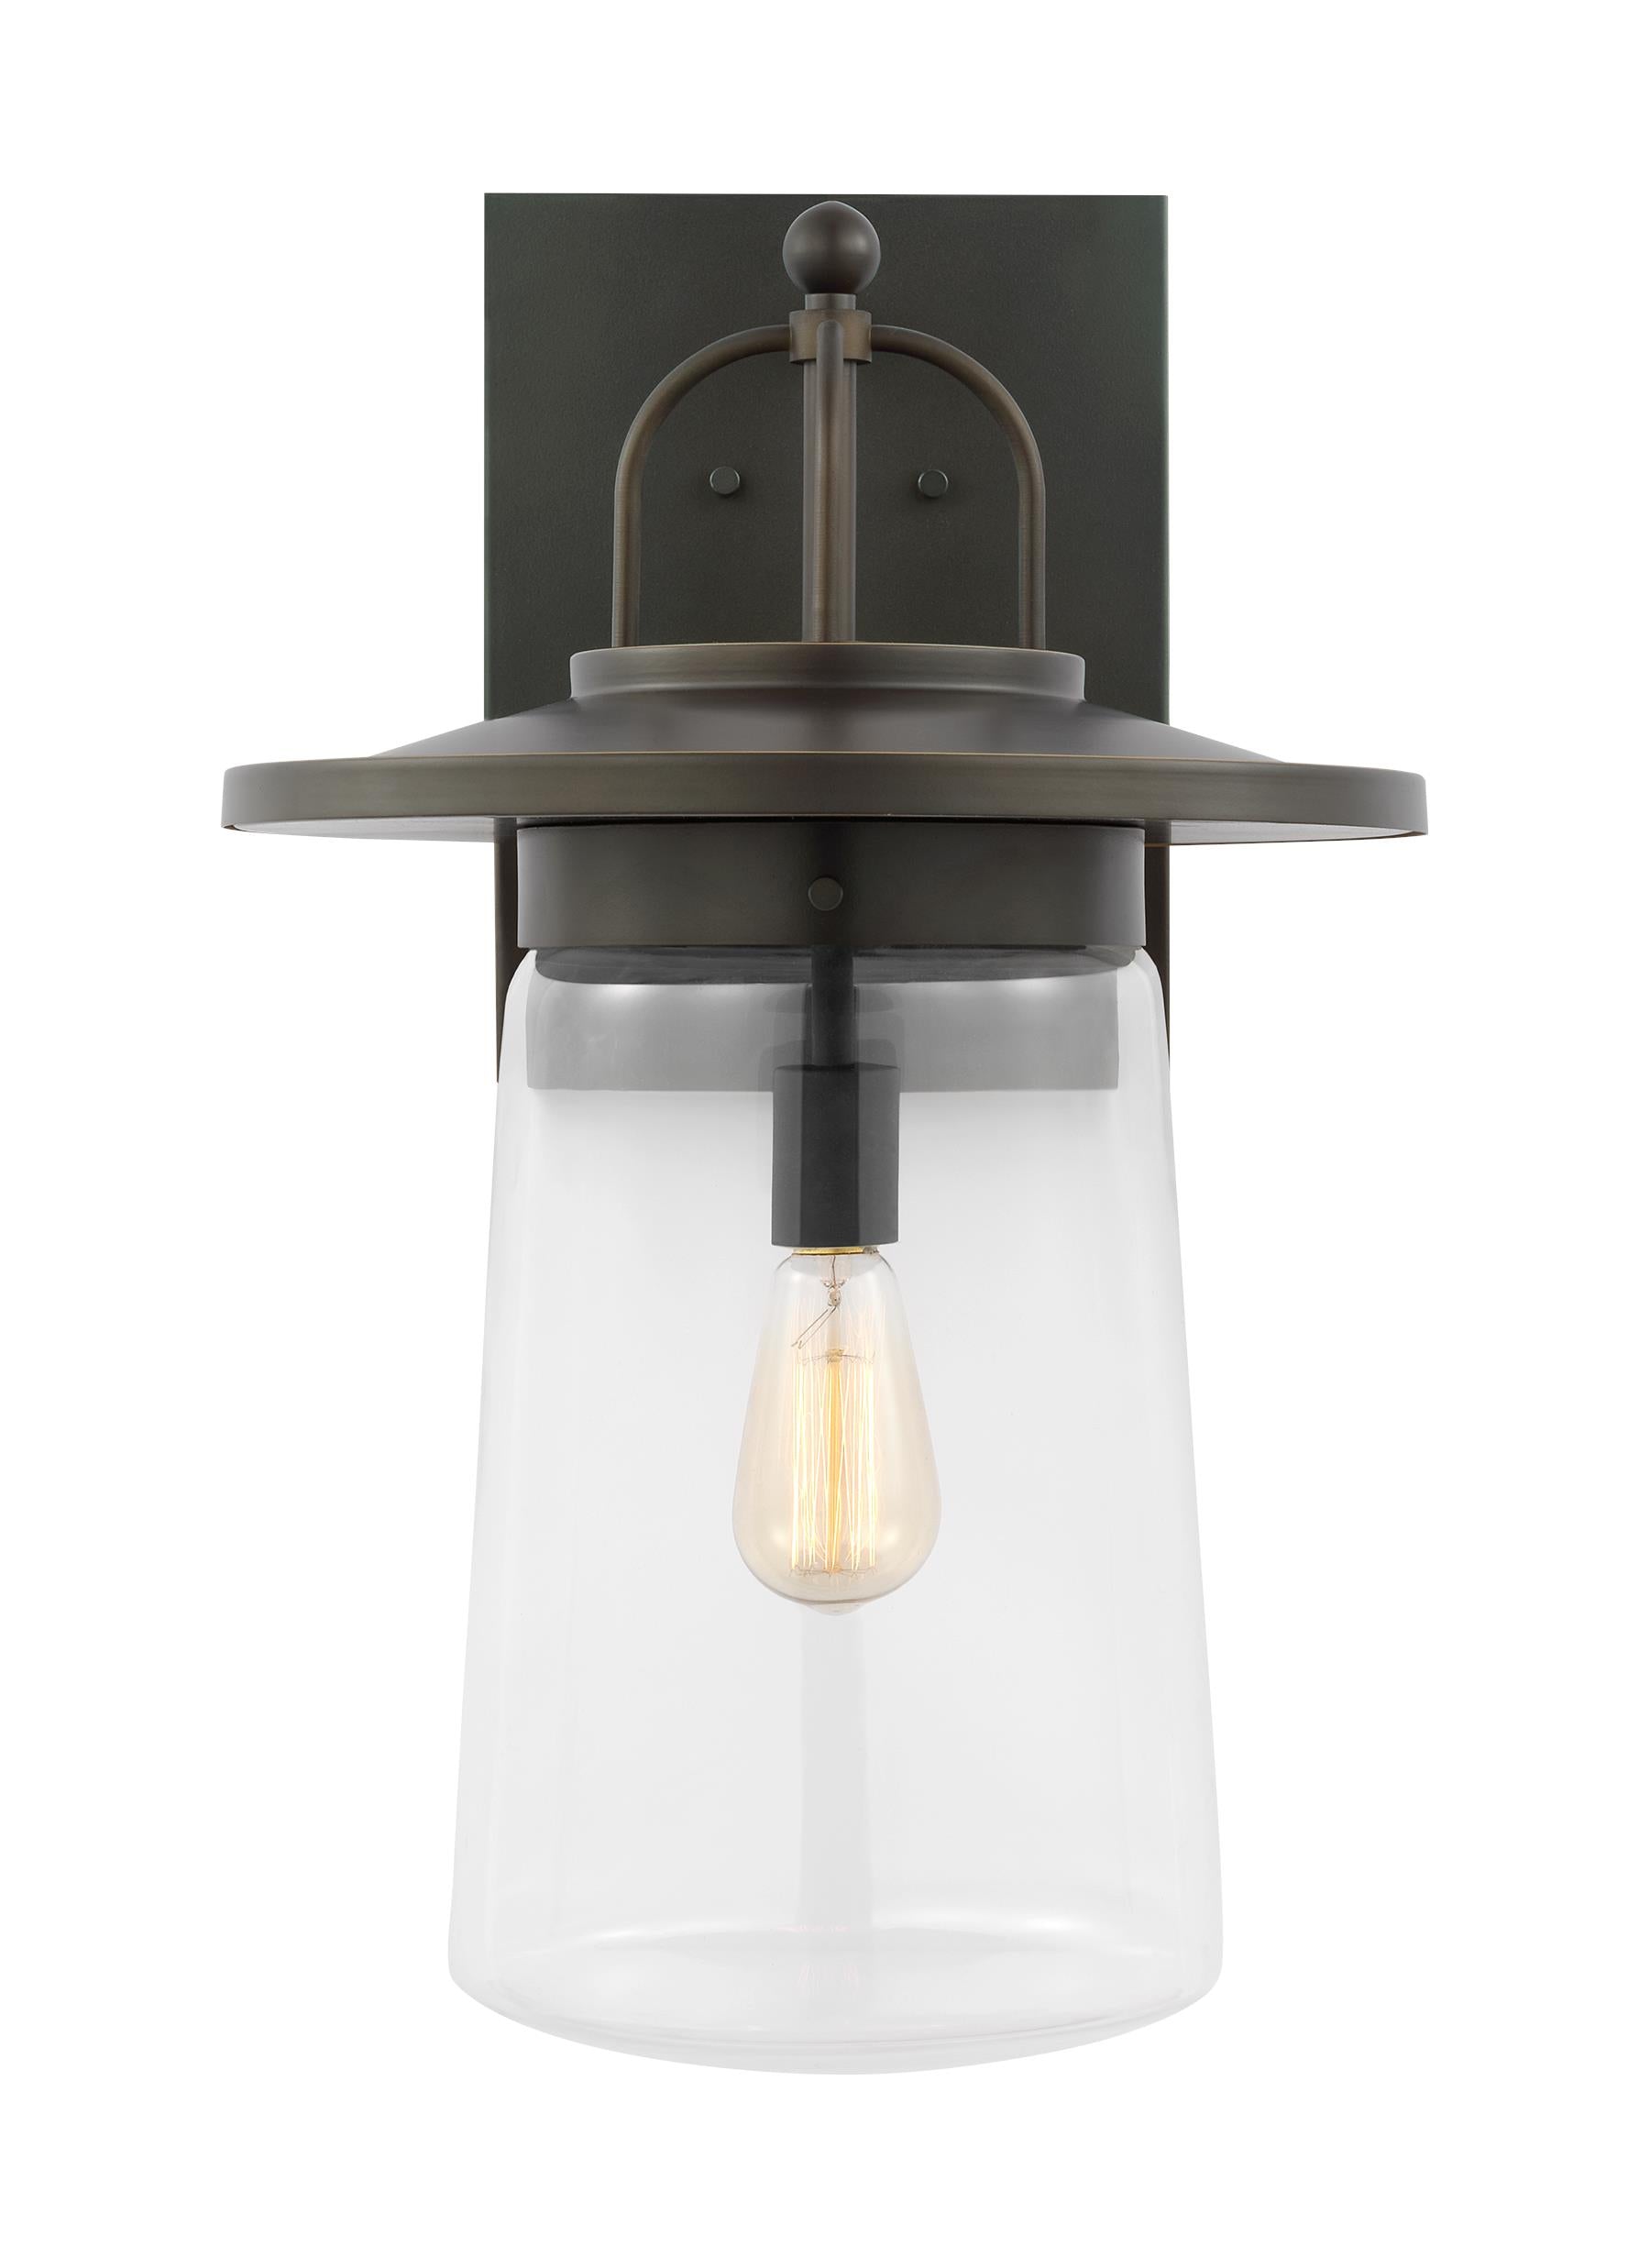 Tybee traditional 1-light outdoor exterior extra-large wall lantern in antique bronze finish with clear glass shade